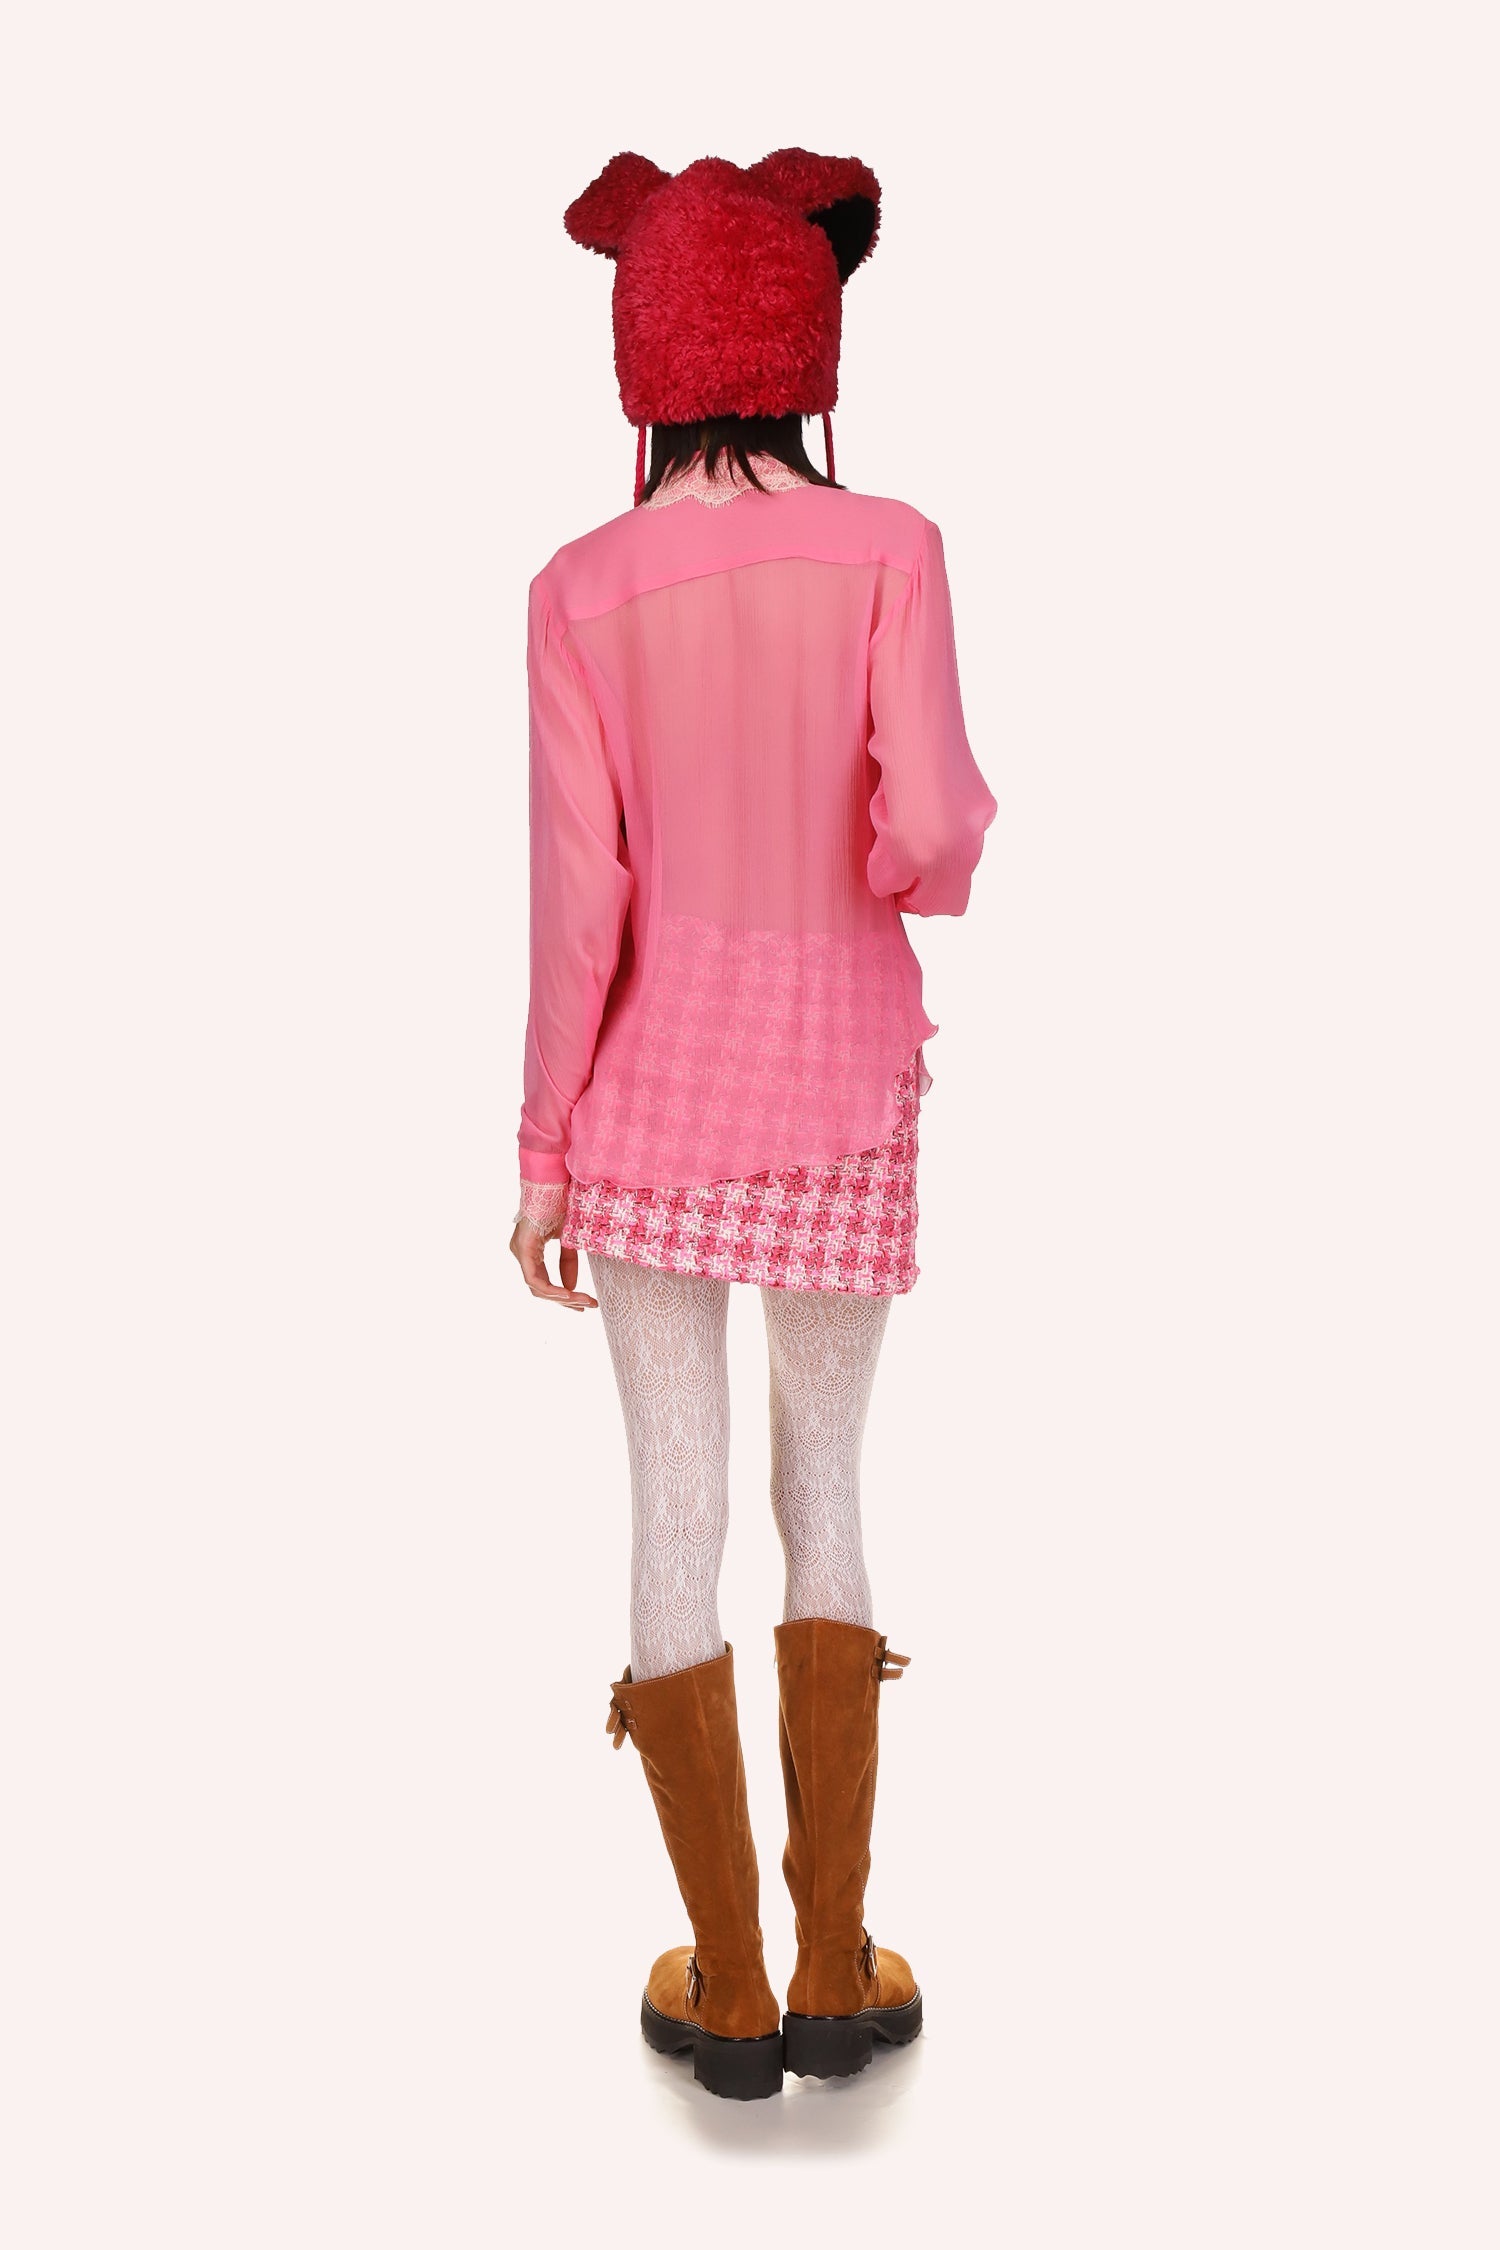 See-through blouse rose, long sleeves, distinctive chiffon Ruffle collar, 7-buttons, V-cut on hips